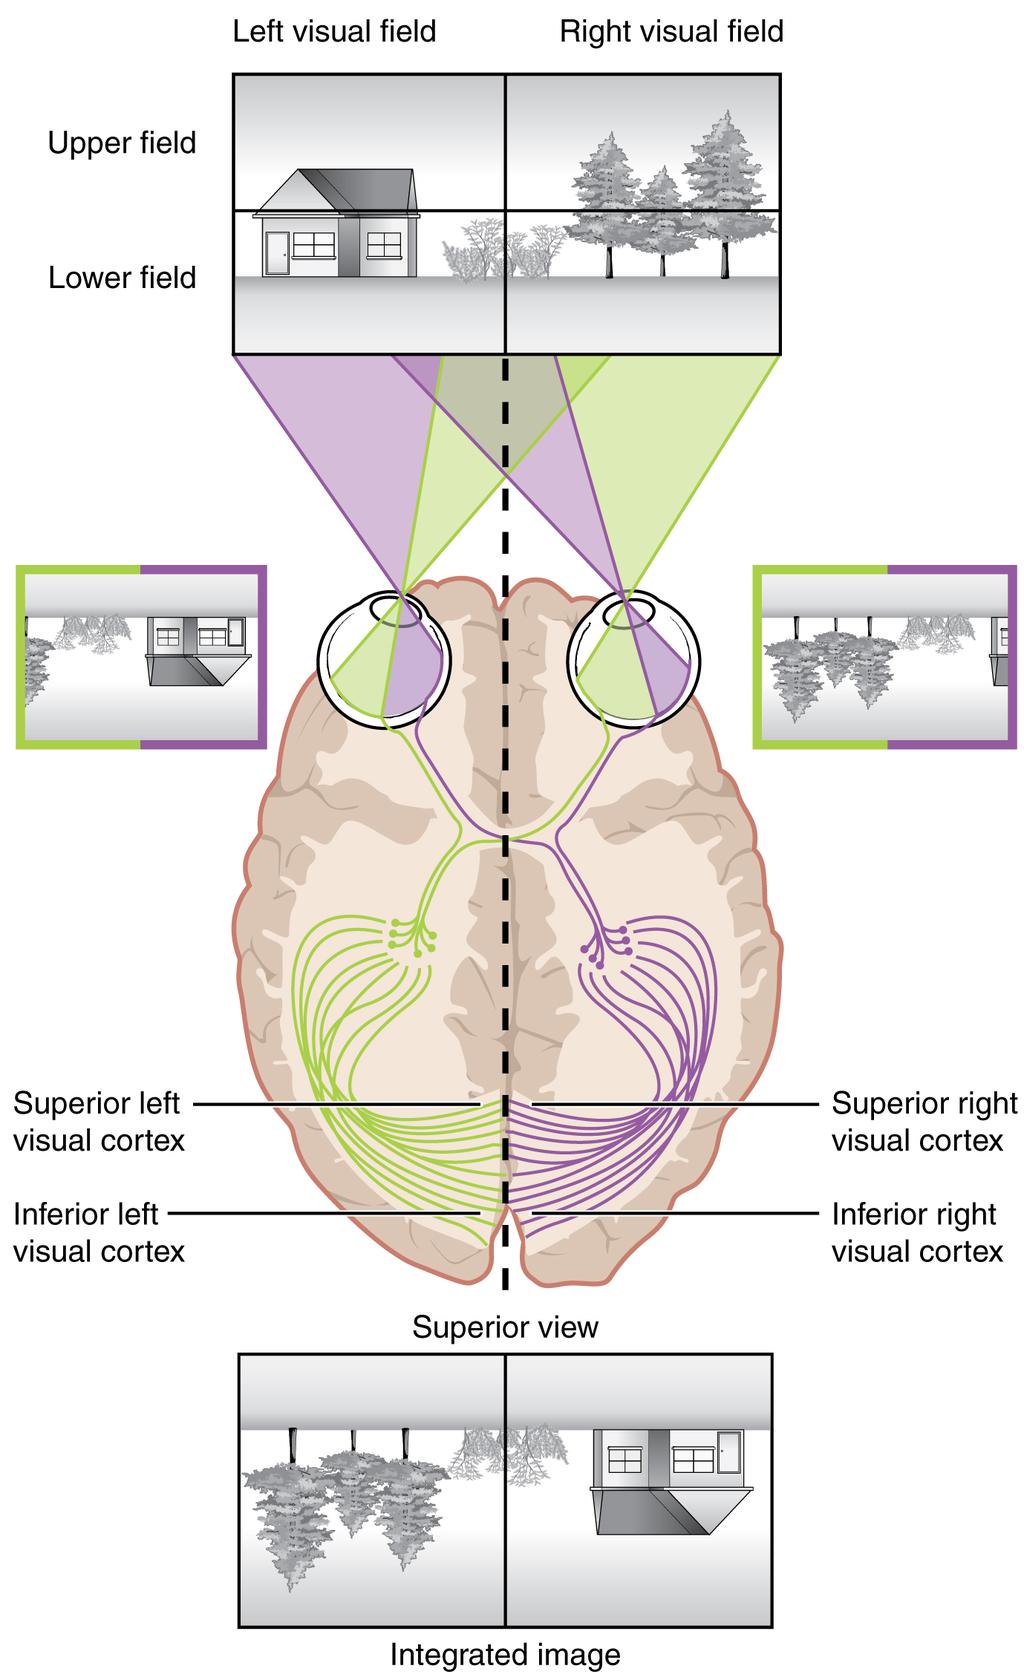 OpenStax-CNX module: m46557 13 Topographic Mapping of the Retina onto the Visual Cortex Figure 6: The visual eld projects onto the retina